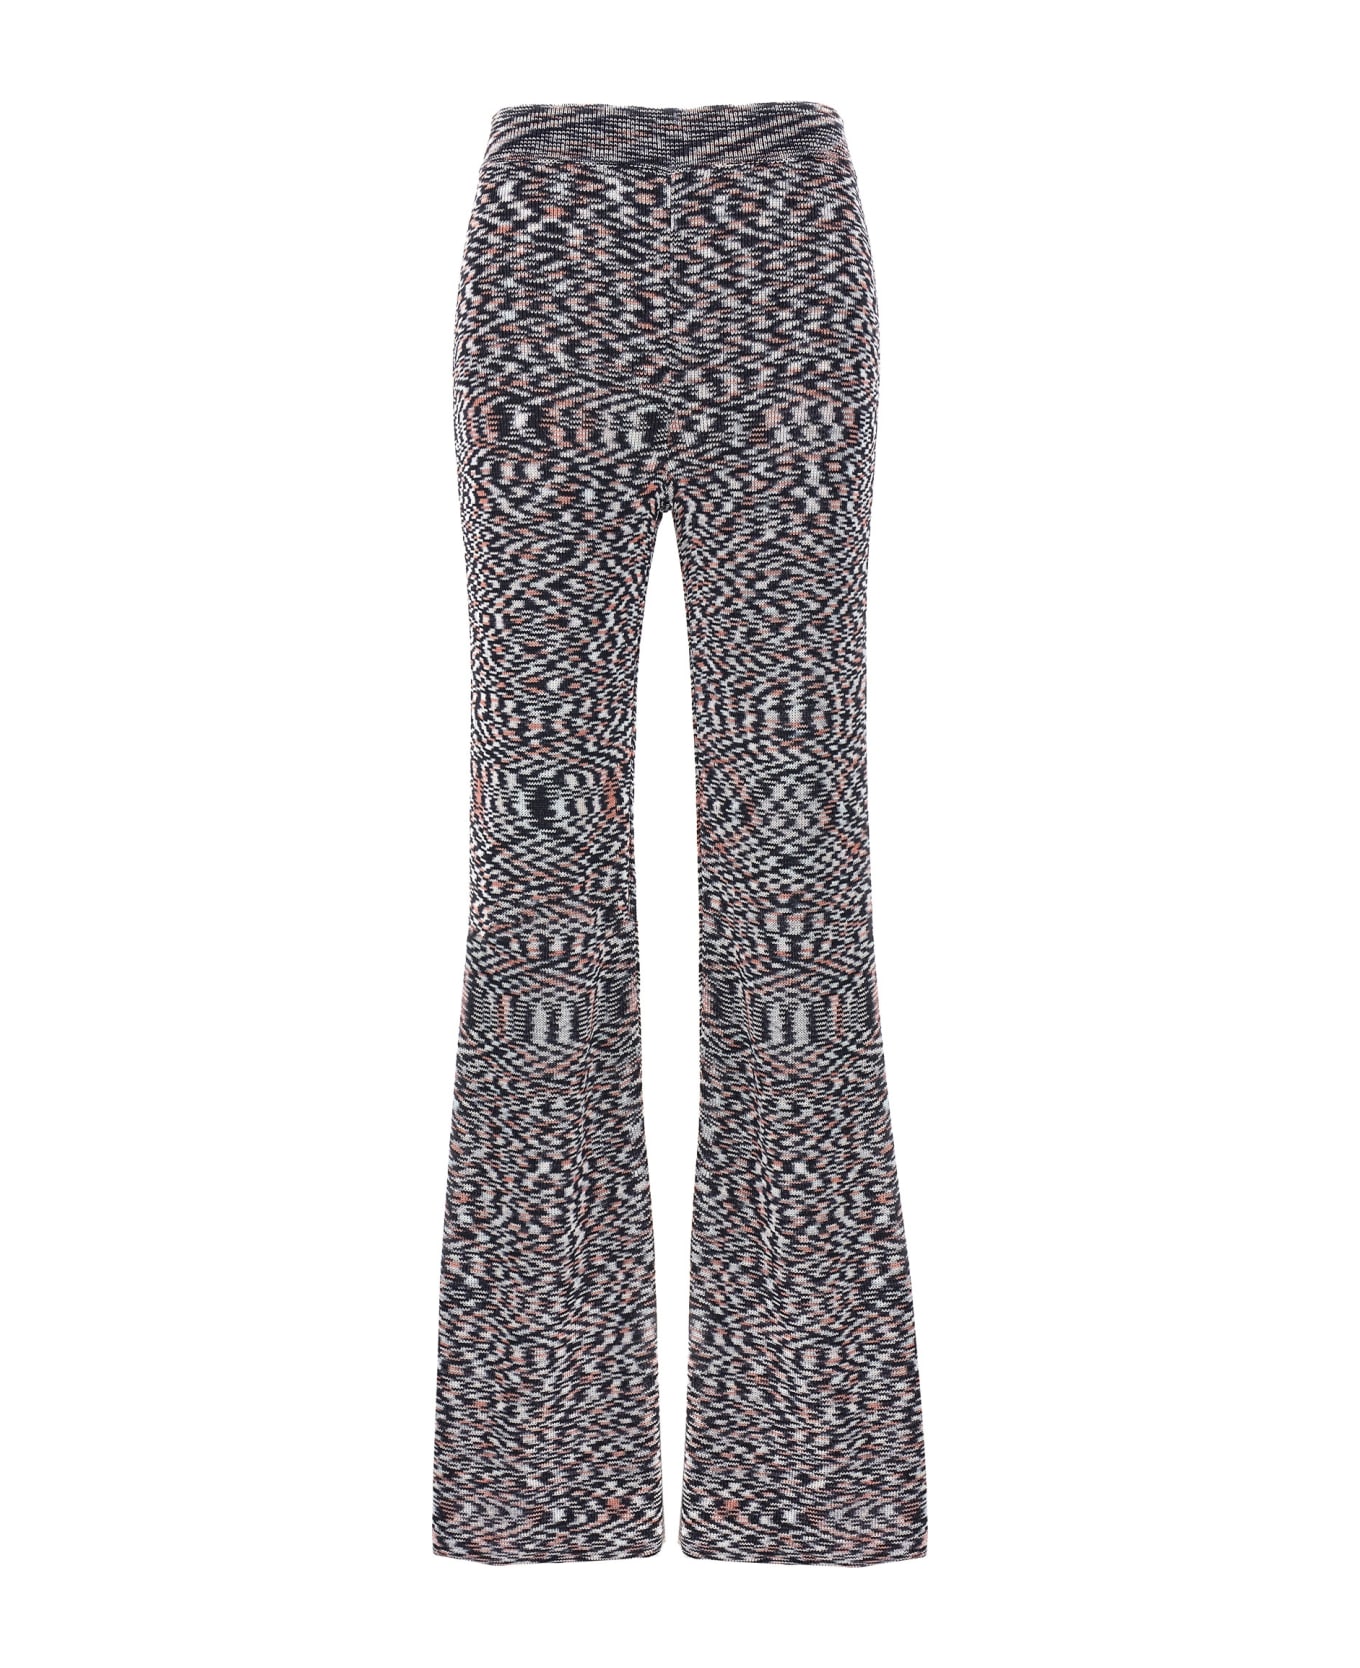 Missoni Patterned Trousers - Multicolor